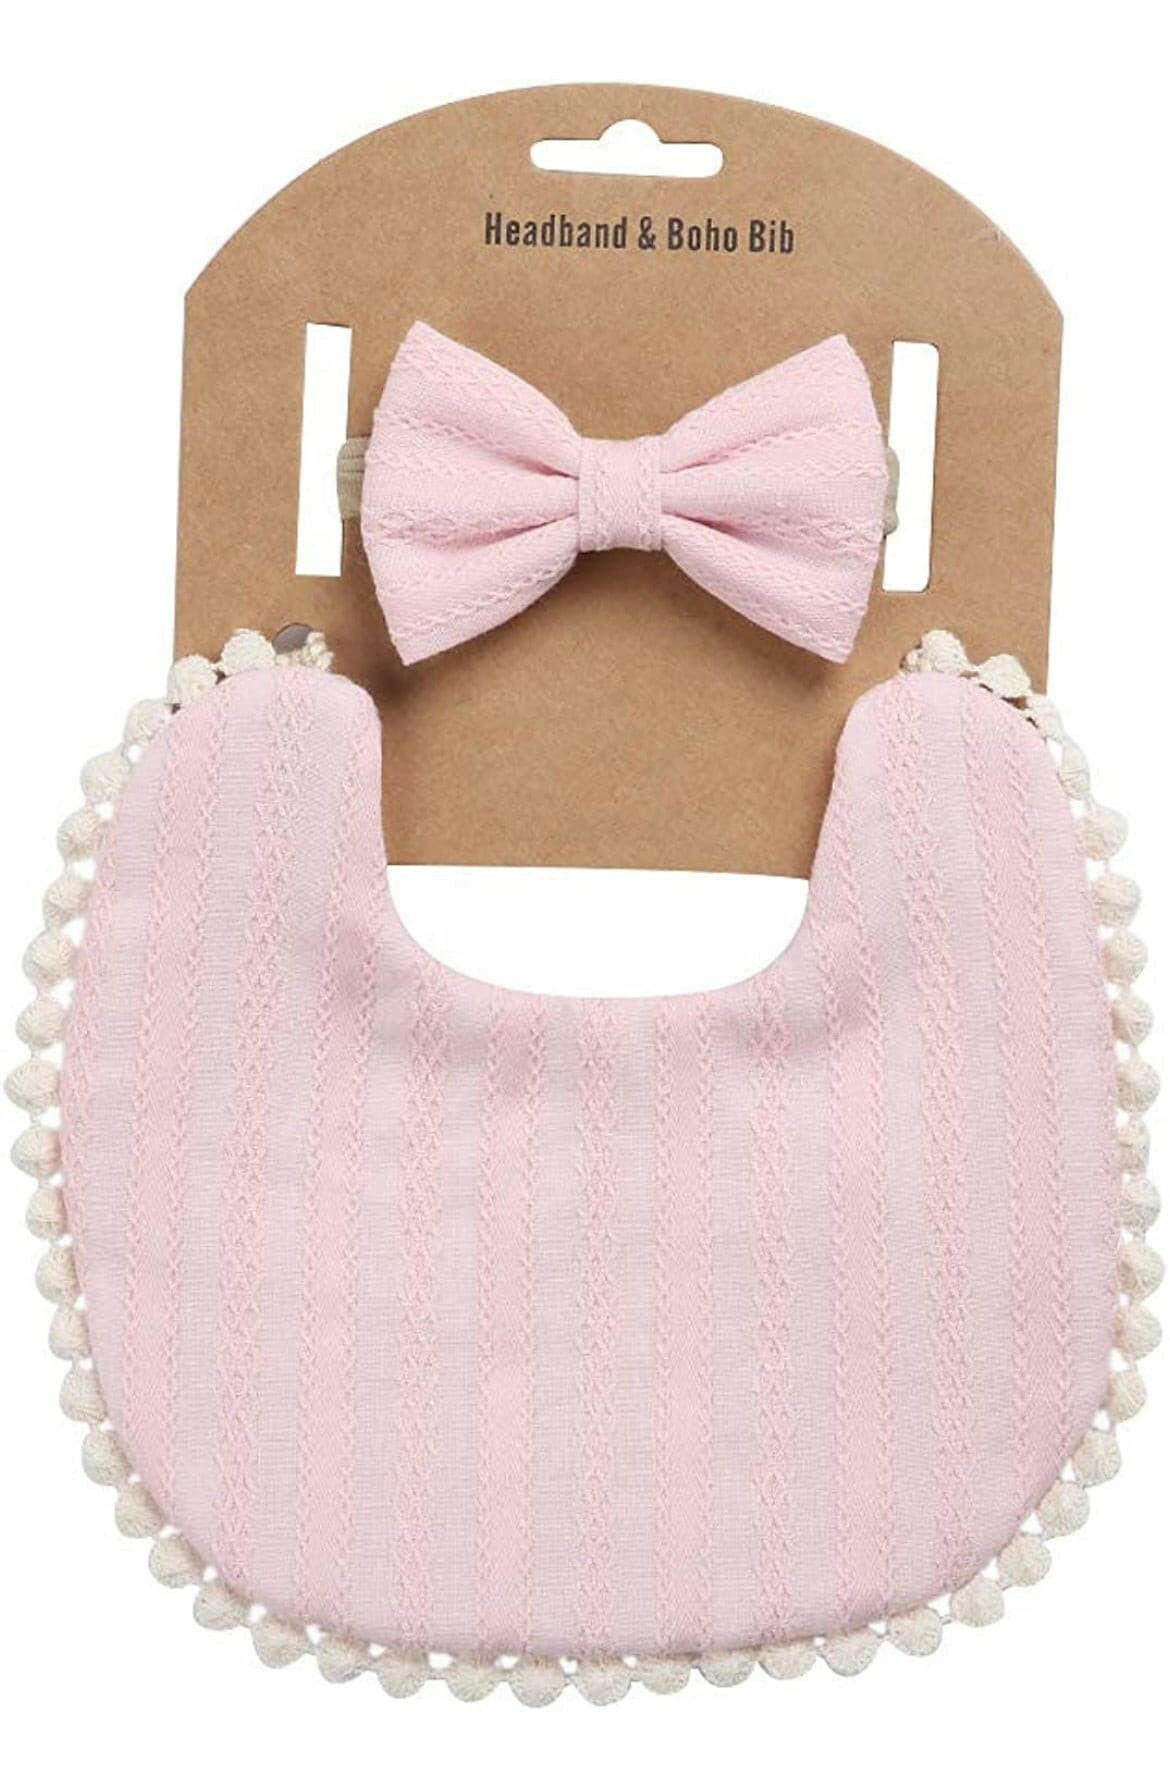 Cotton Double Sided Adjustable Bibs with bandana for baby girl.